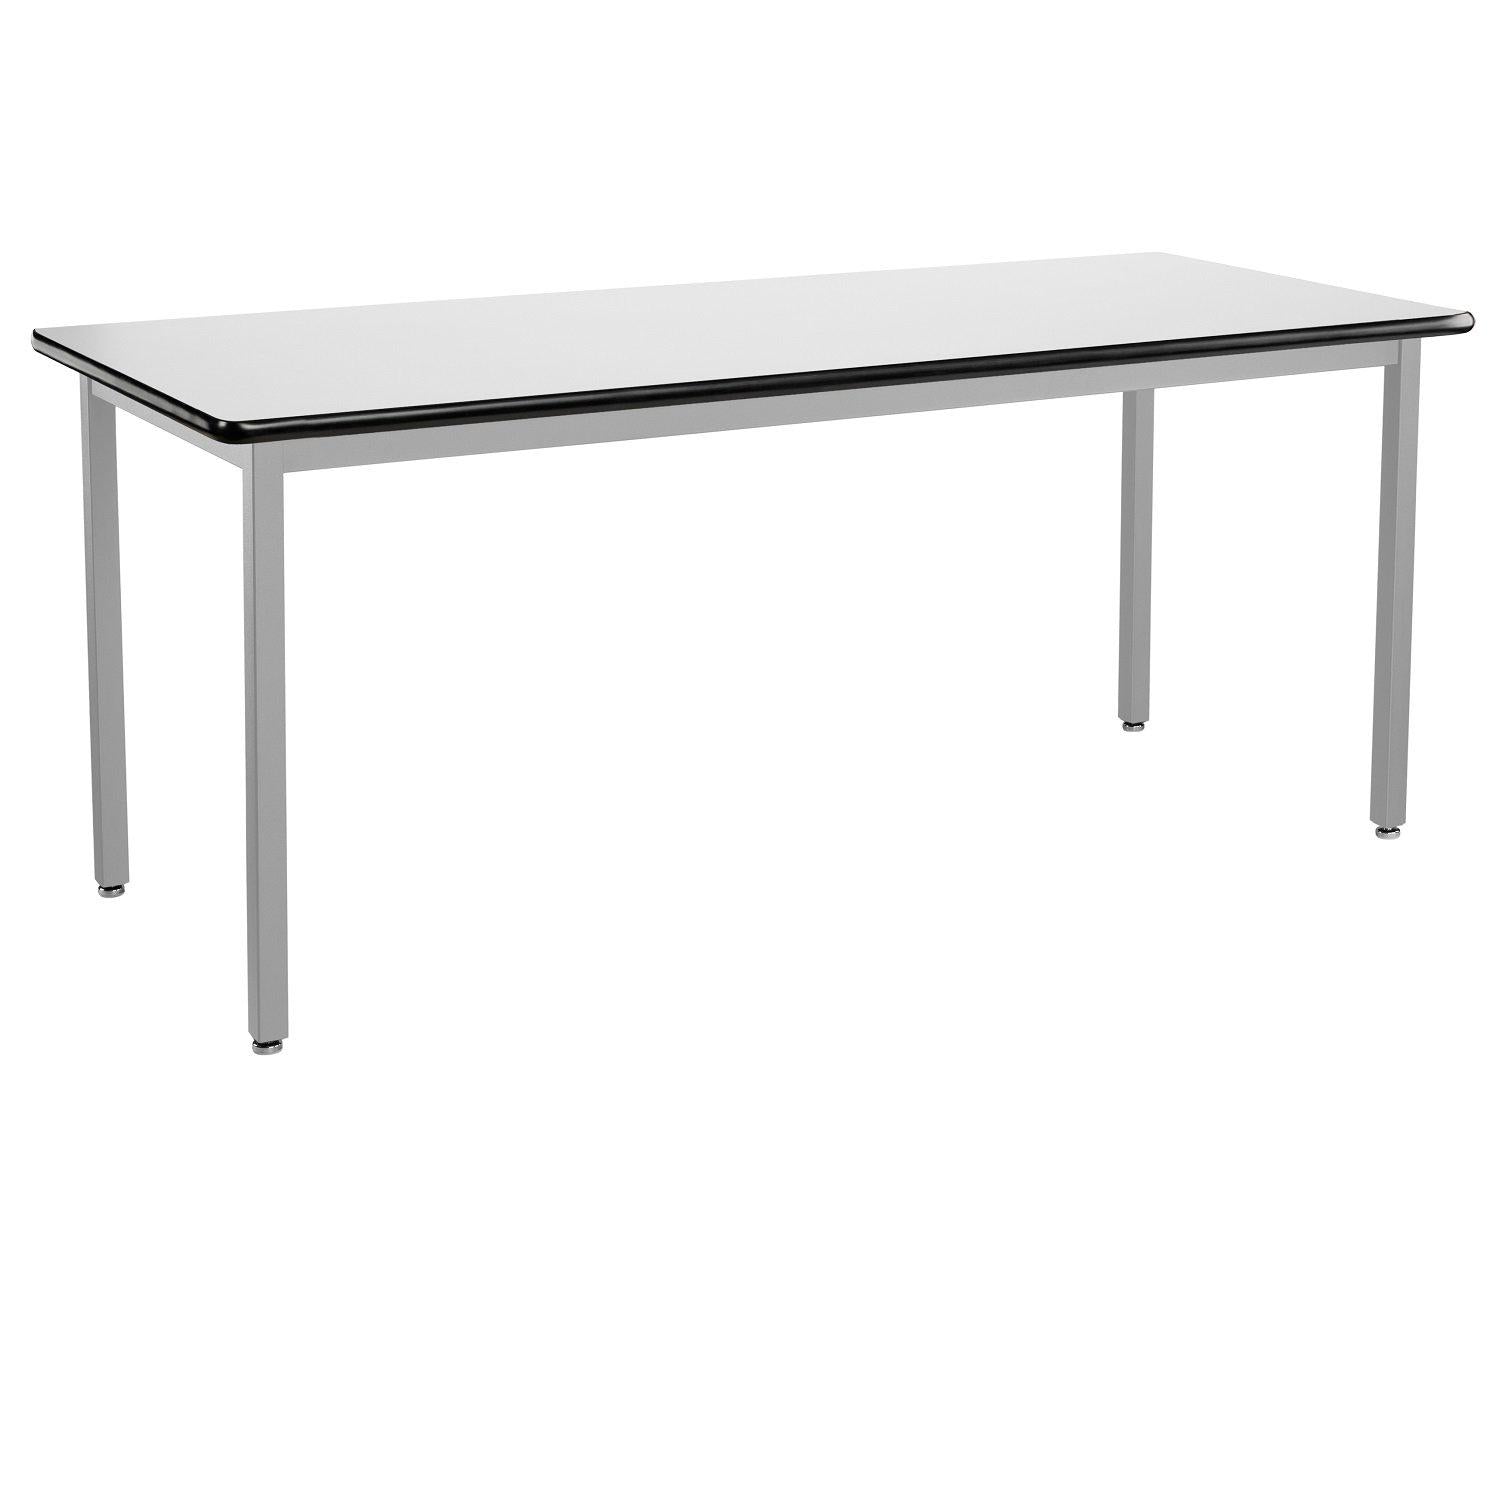 Heavy-Duty Fixed Height Utility Table, Soft Grey Frame, 24" x 84", Whiteboard High-Pressure Laminate Top